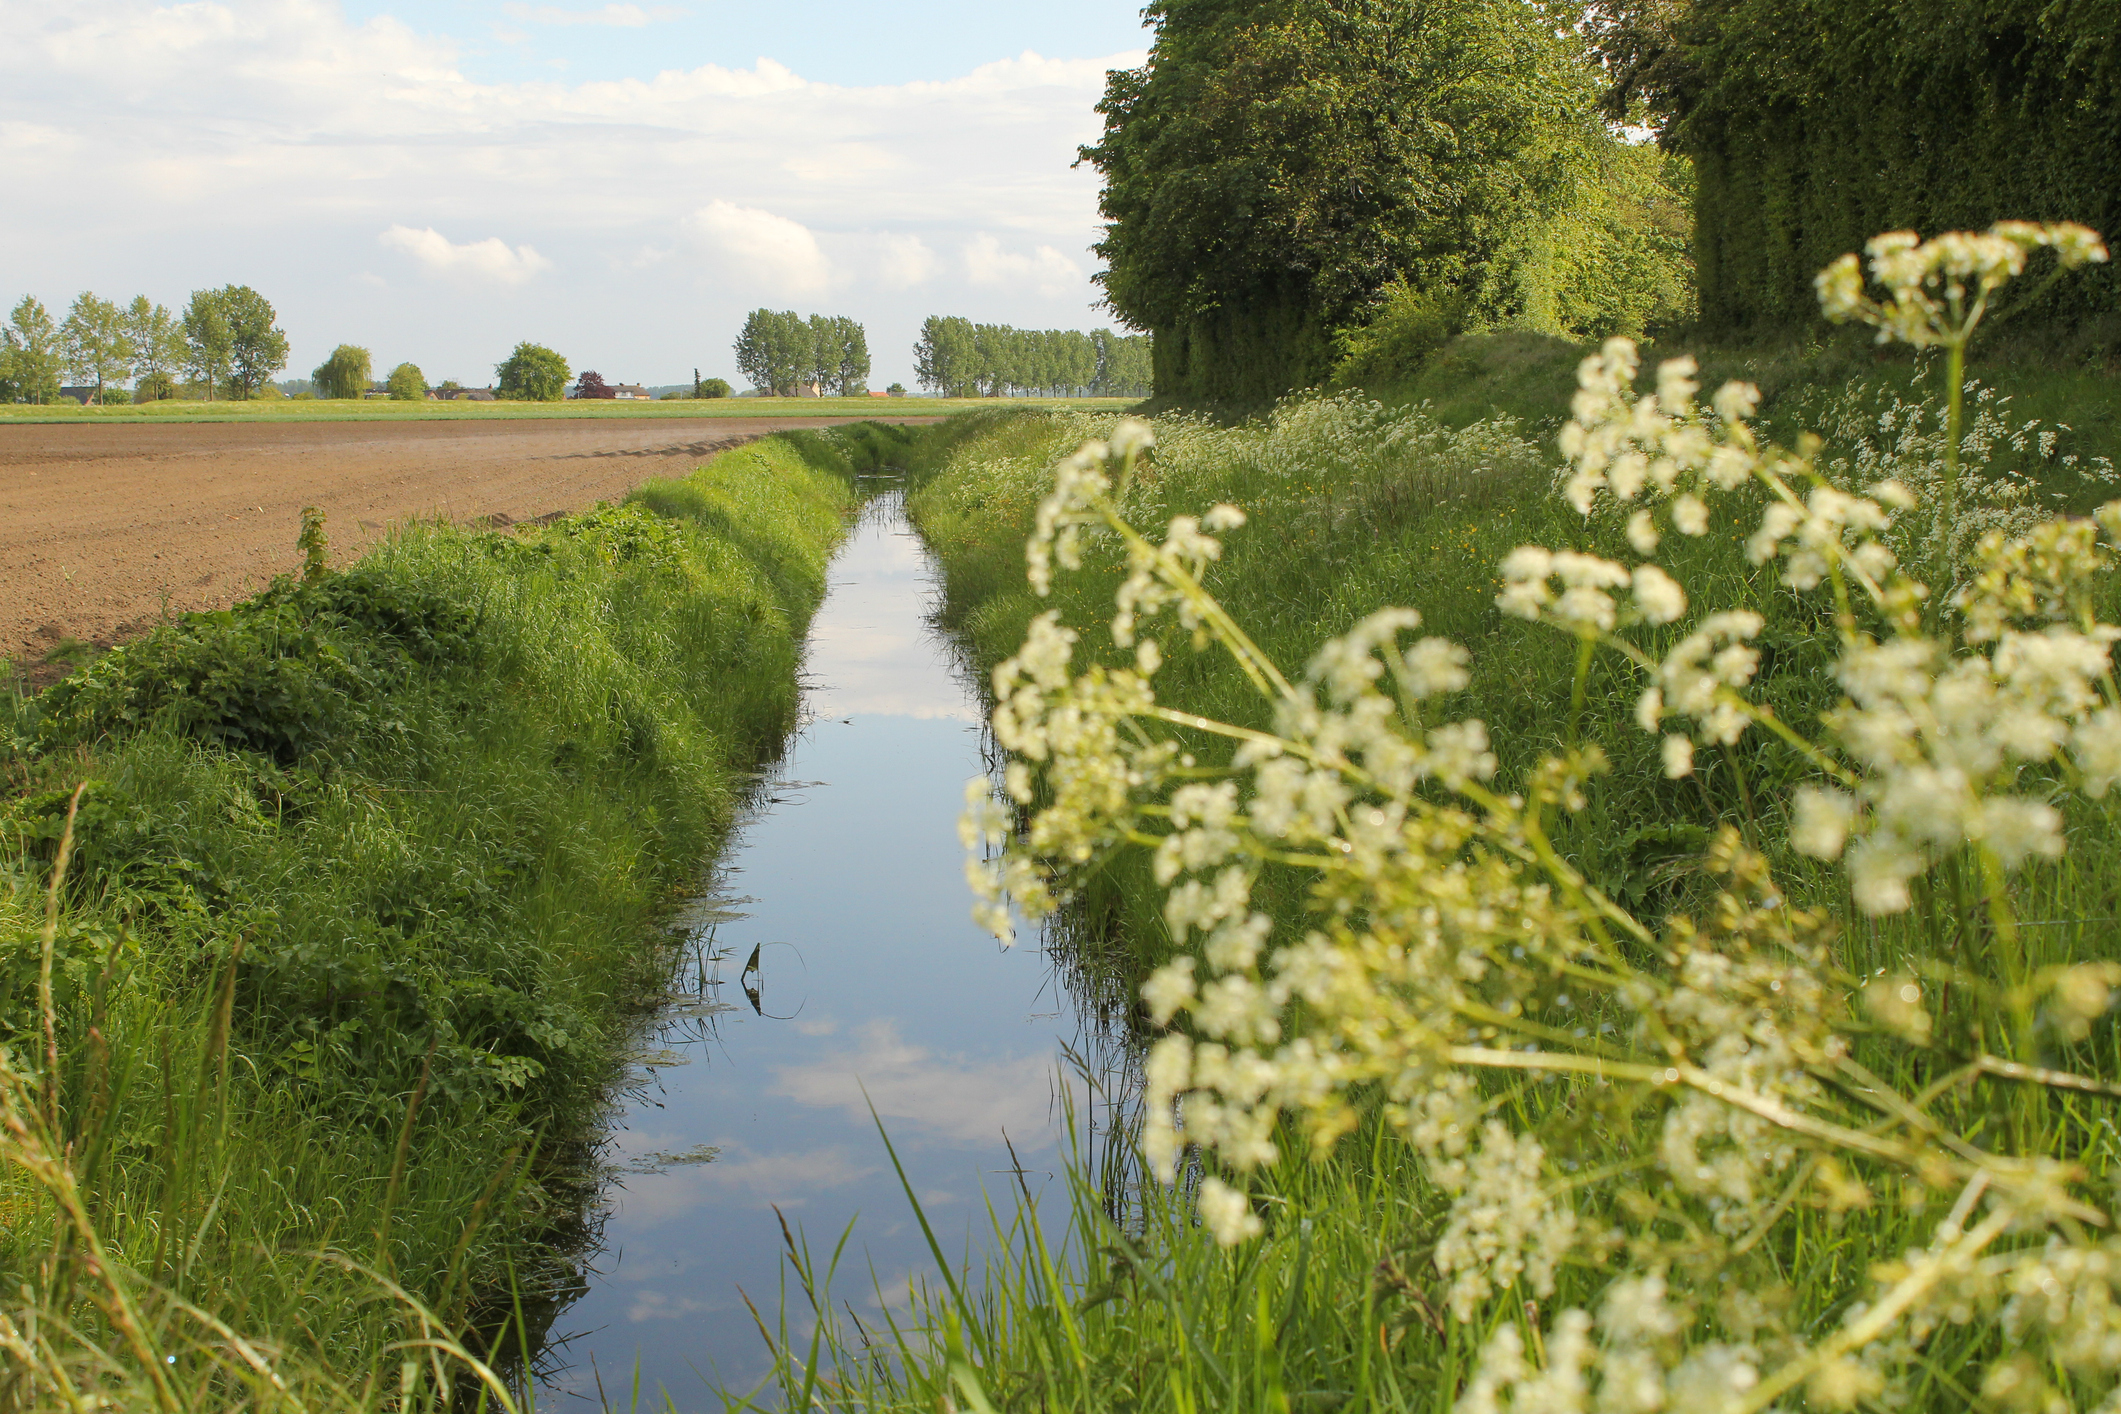 A drainage ditch along an agricultural field